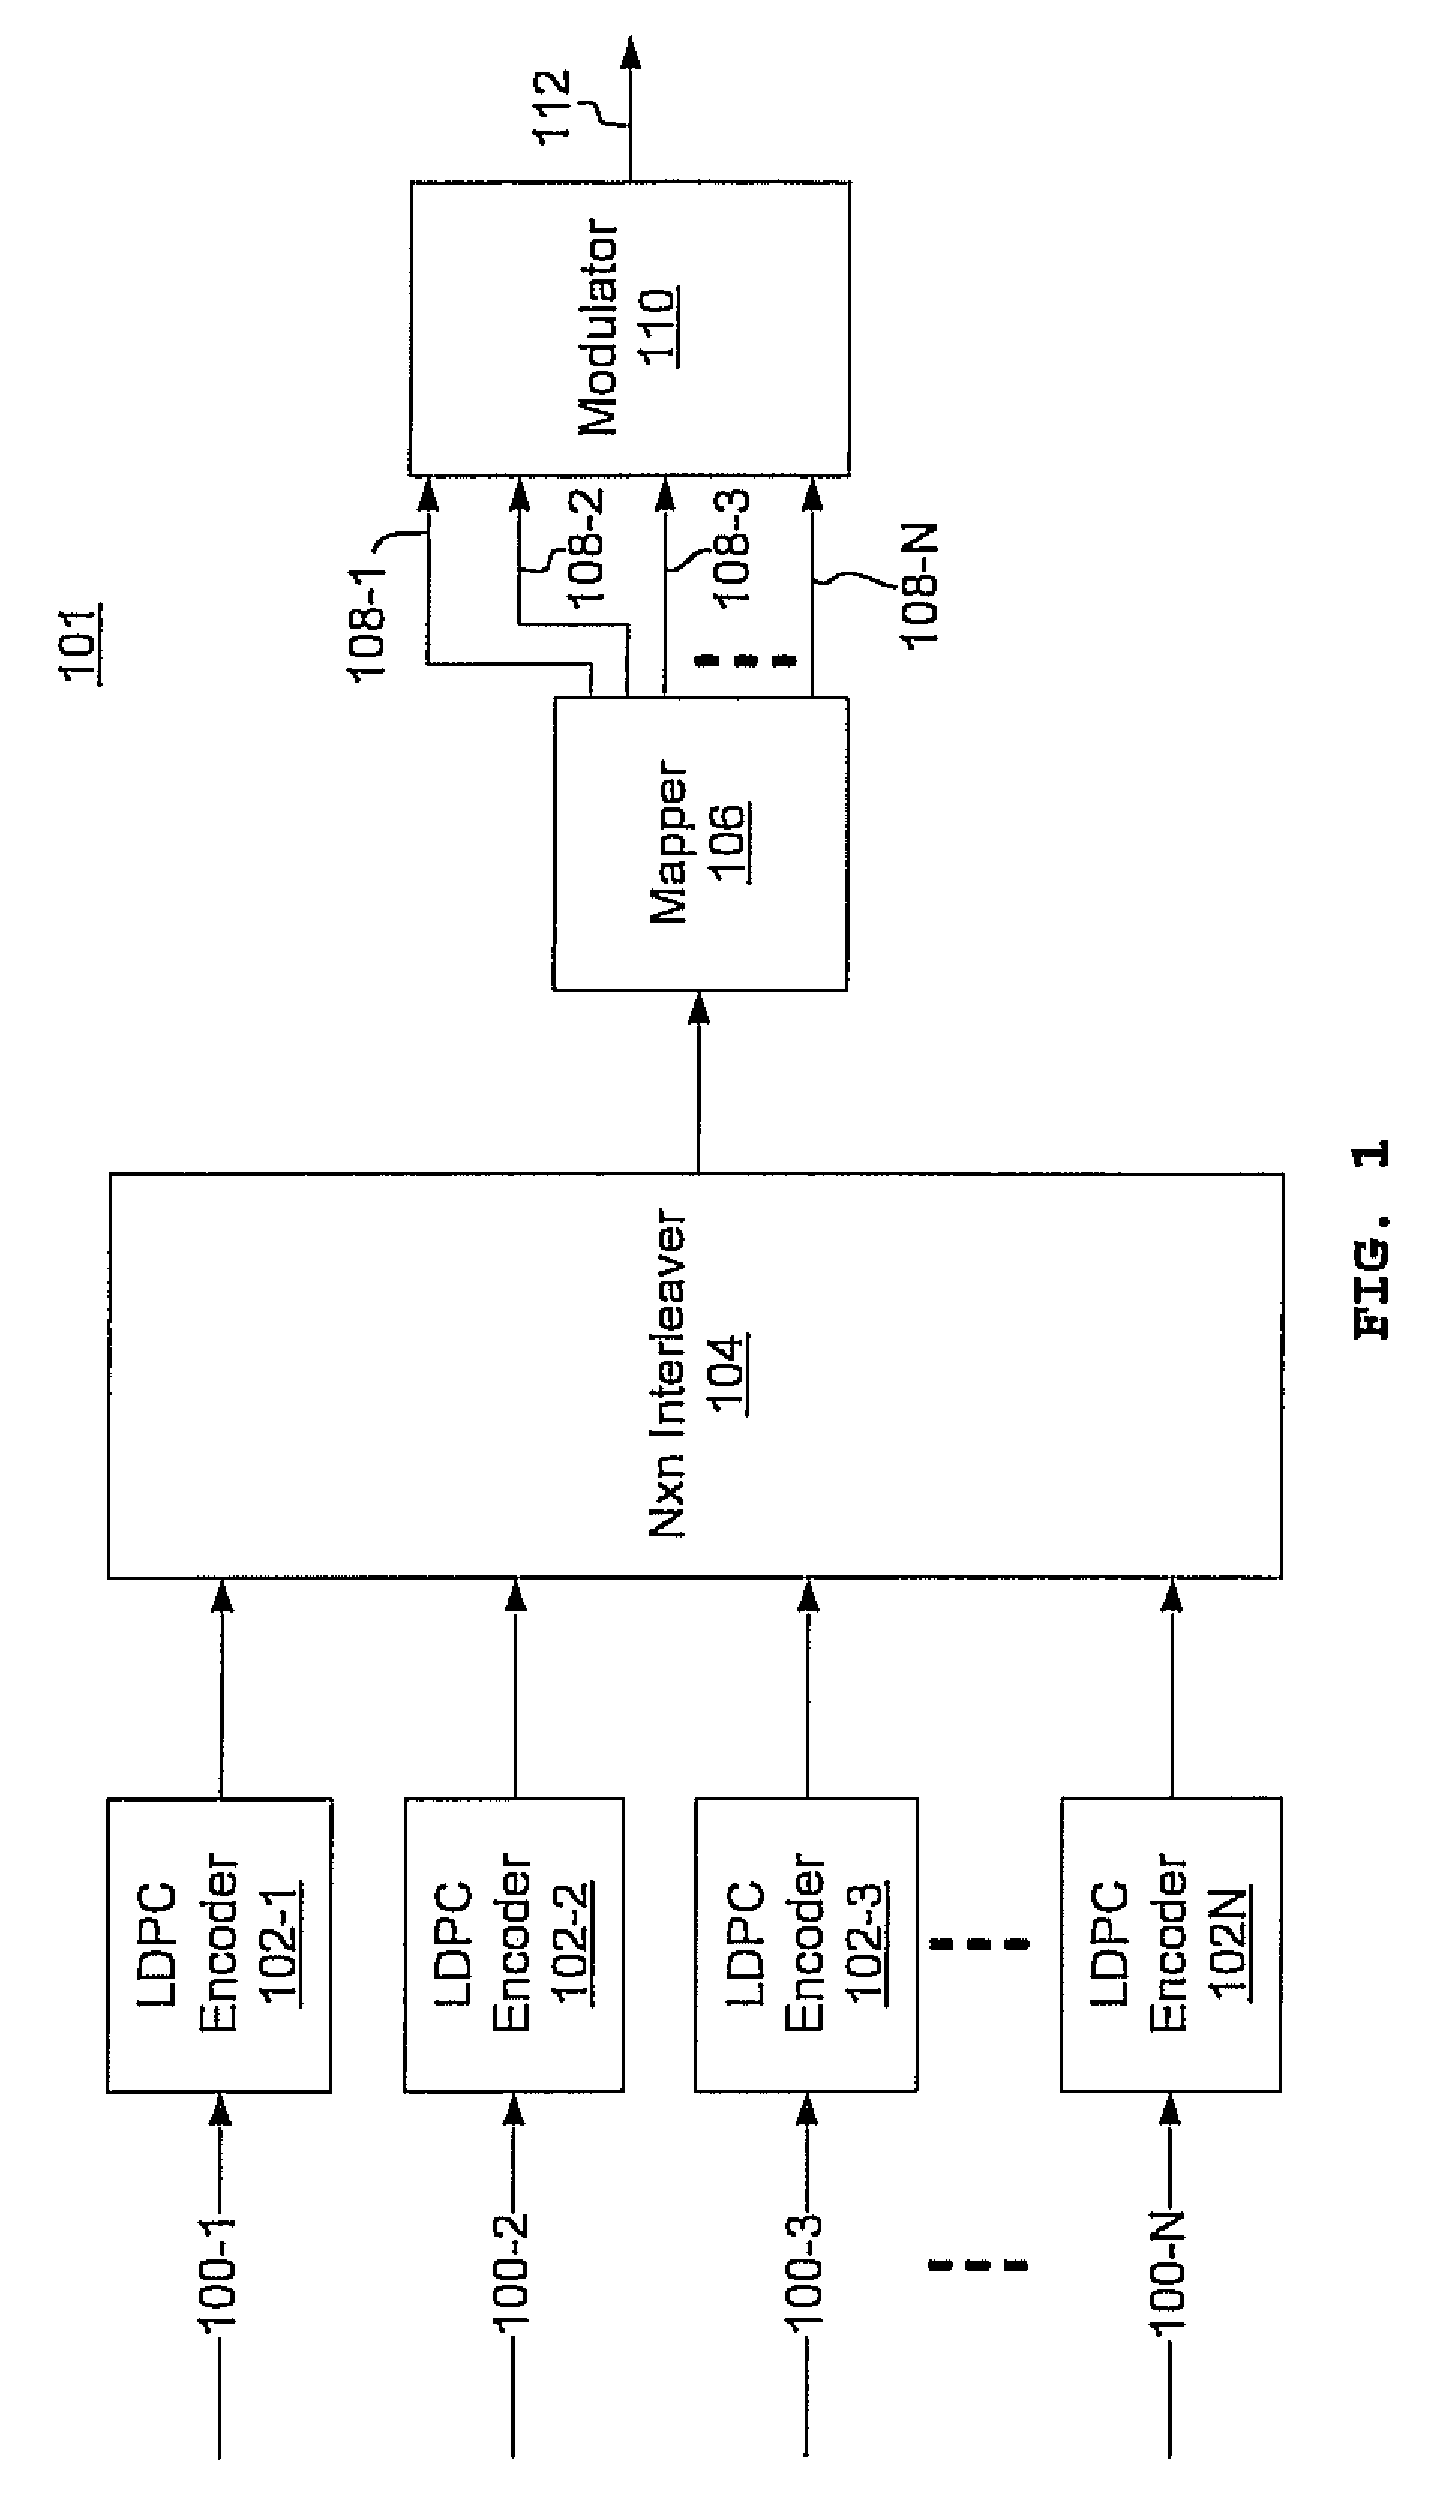 Multi-dimensional LDPC coded modulation for high-speed optical transmission systems